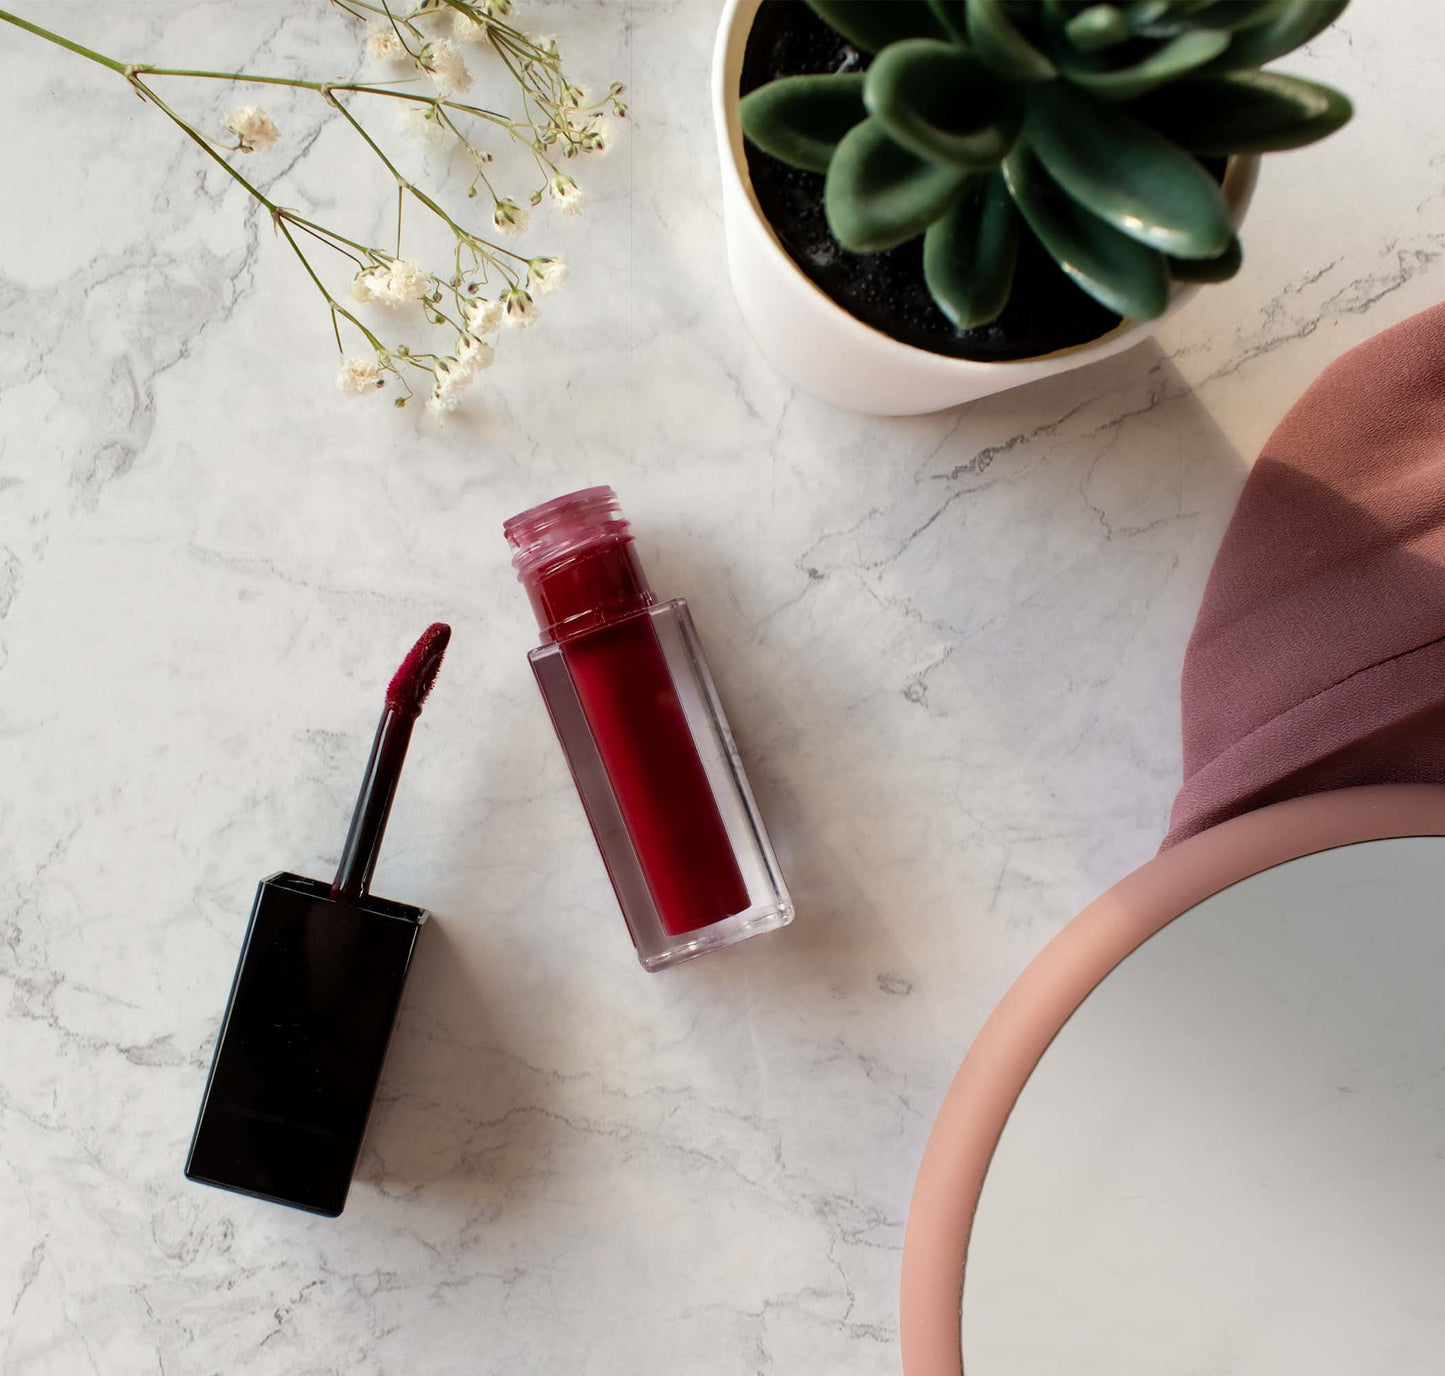 Enhance your lips with Cruisin Organics Blackberry Lip Stain. Infused with Vitamin E, this vegan formula provides a matte finish that both softens and moisturizes.